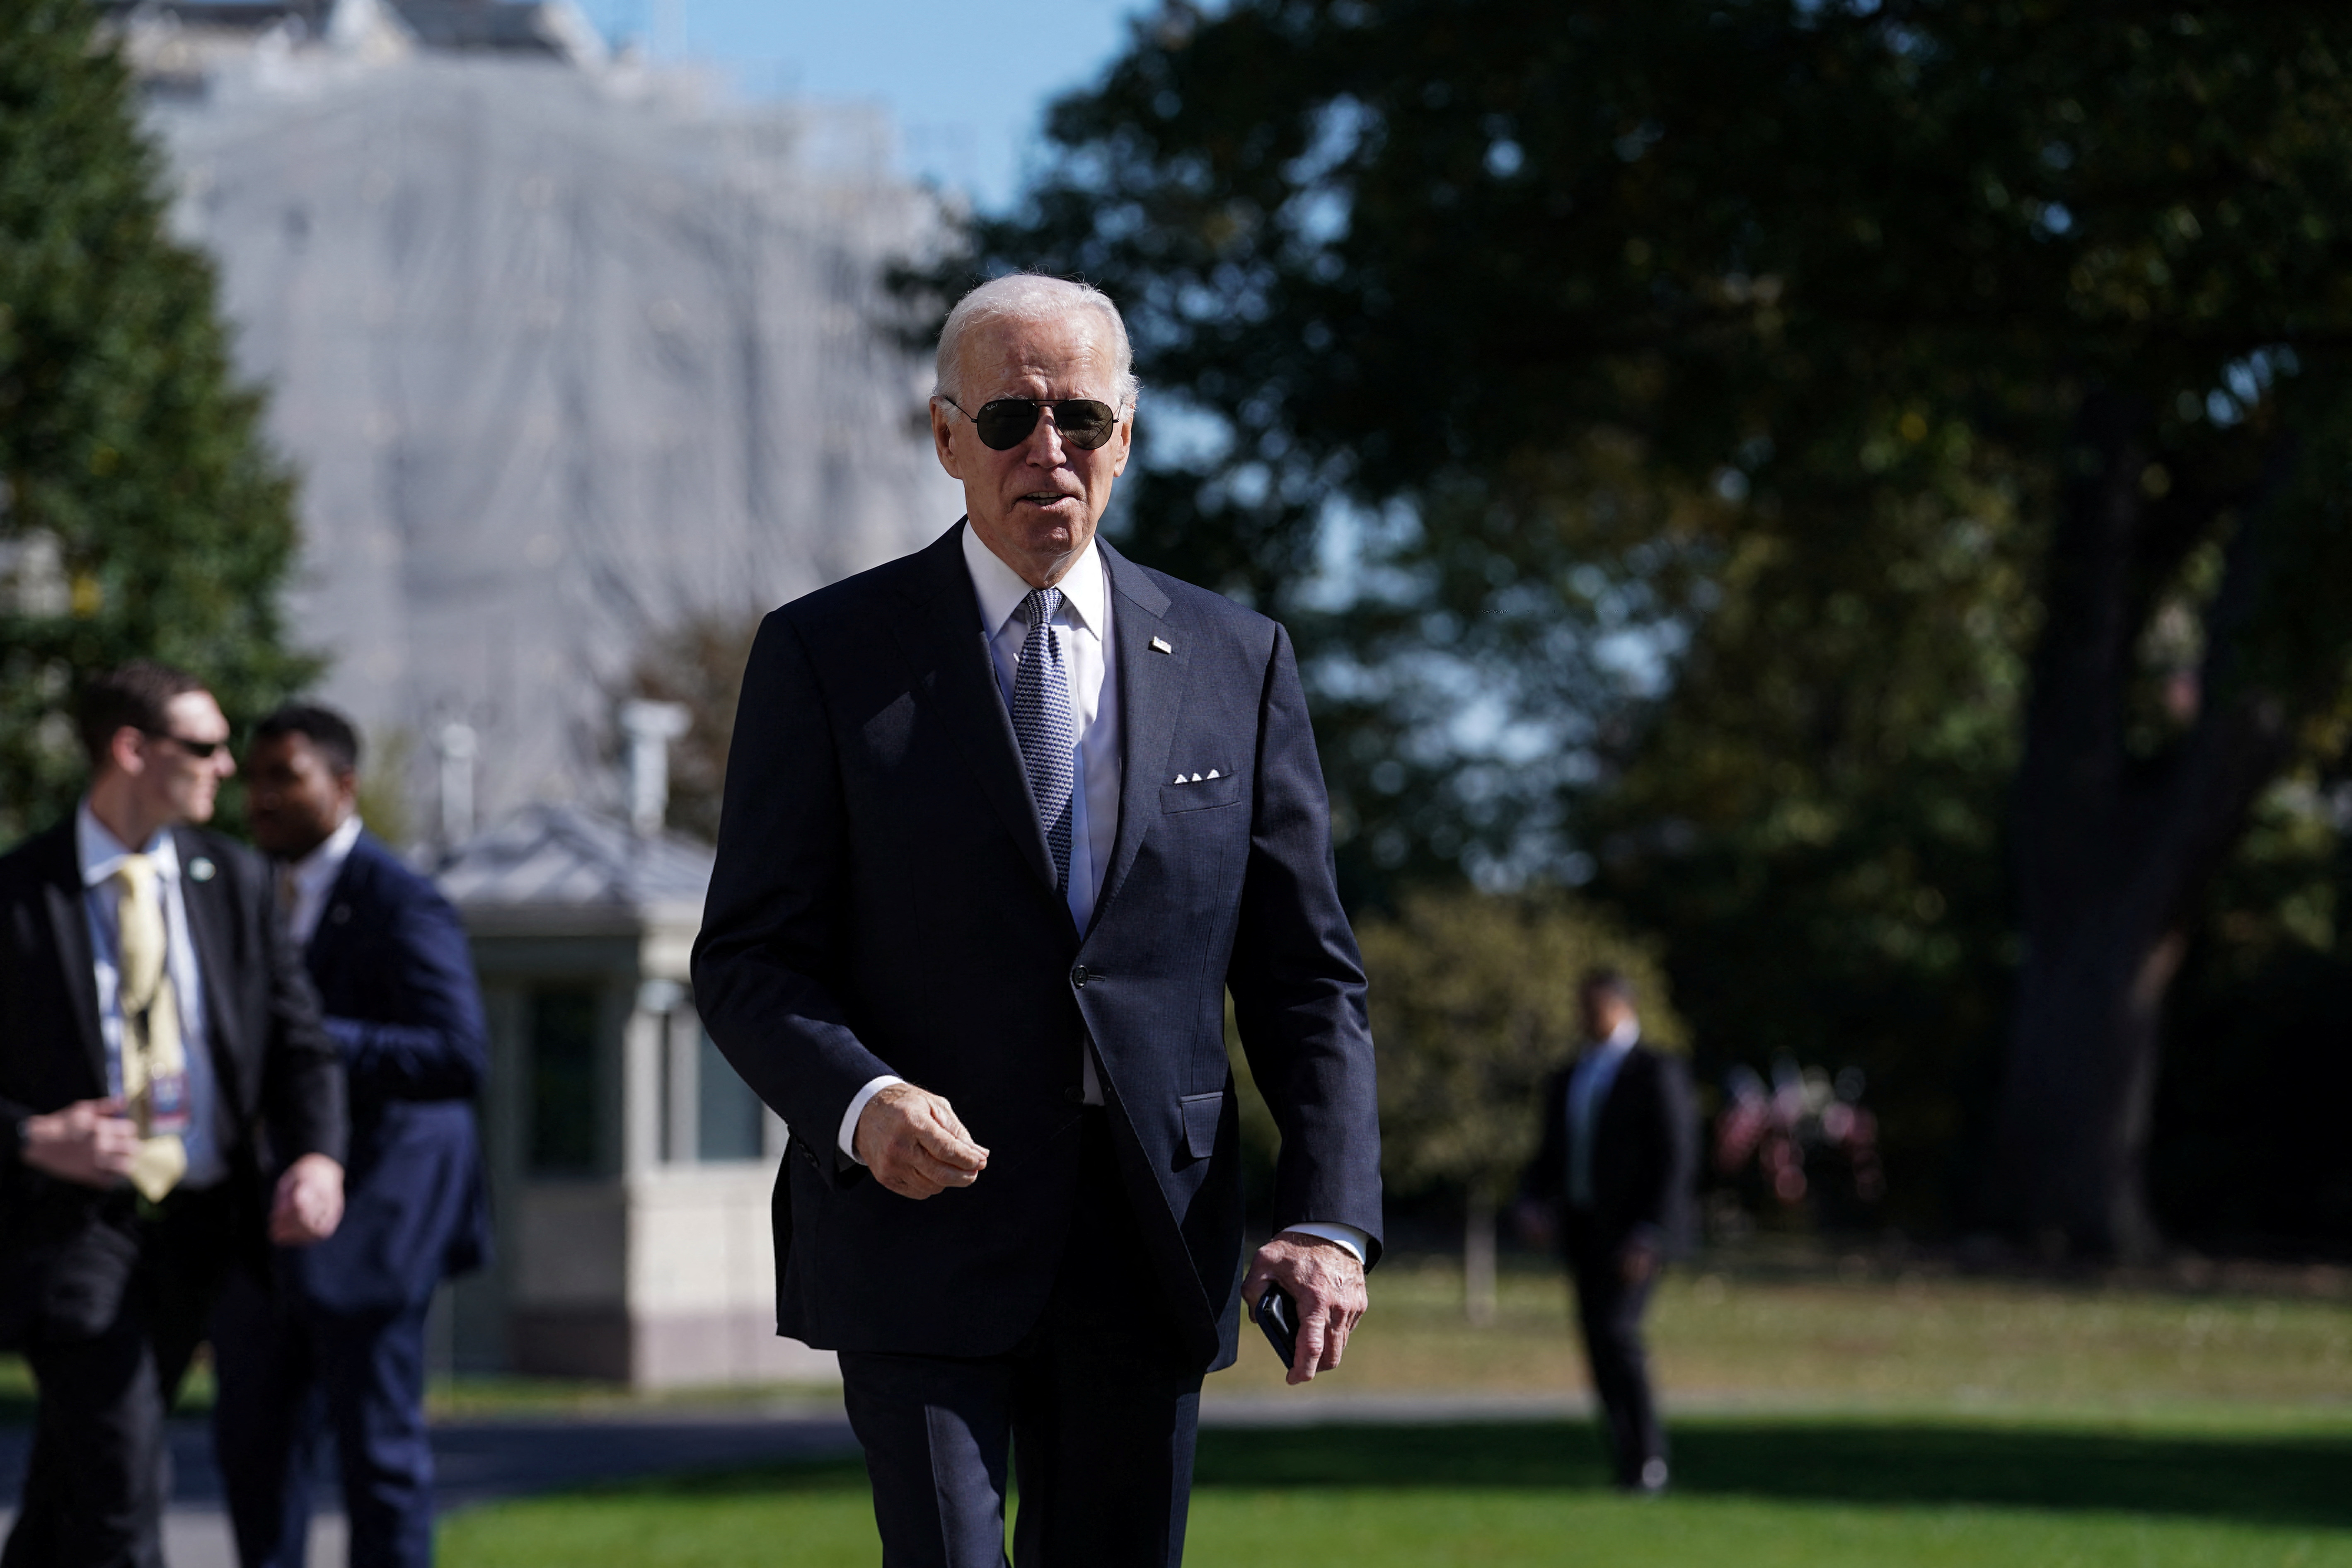 U.S. President Biden departs from White House for trip to Delaware